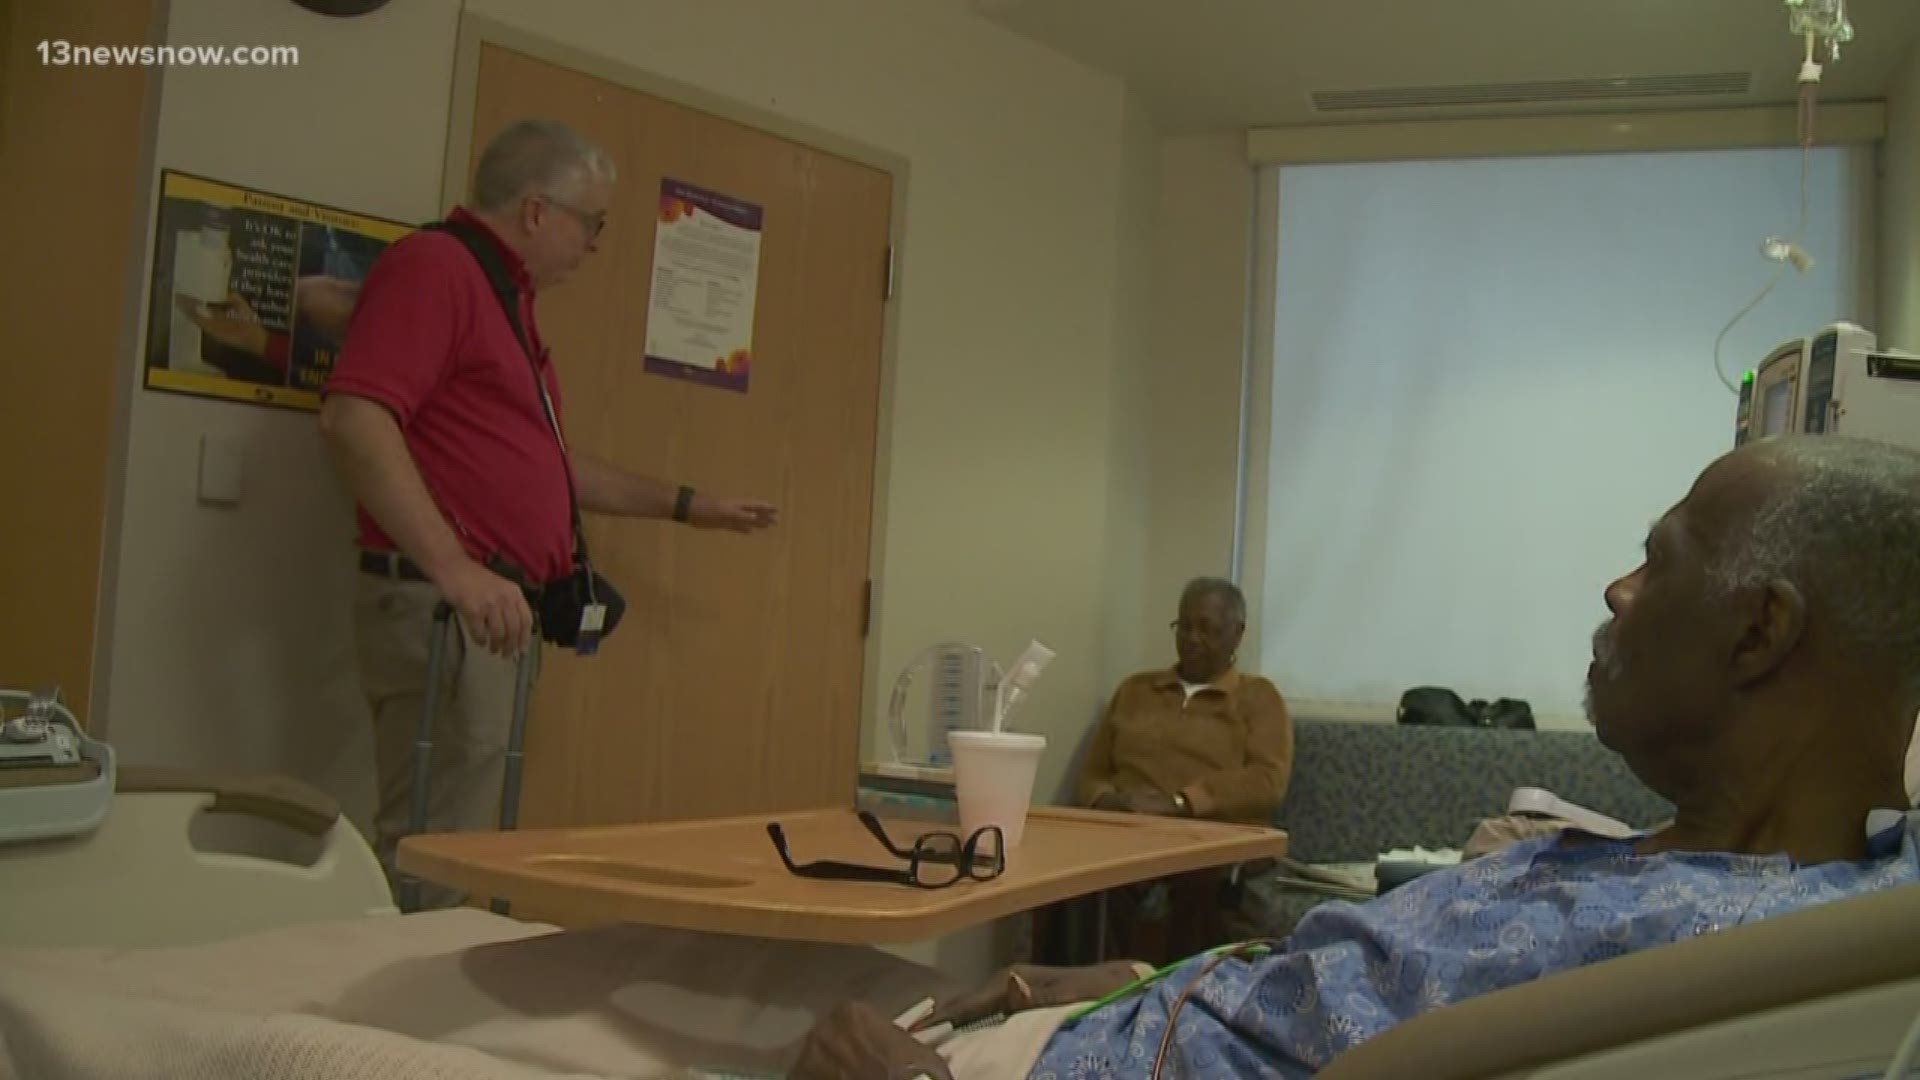 Rufe Vanderpool what patients at Sentara Norfolk General Heart Hospital are going through. As 13News Now Megan Shinn reports, his mission is to make them smile.